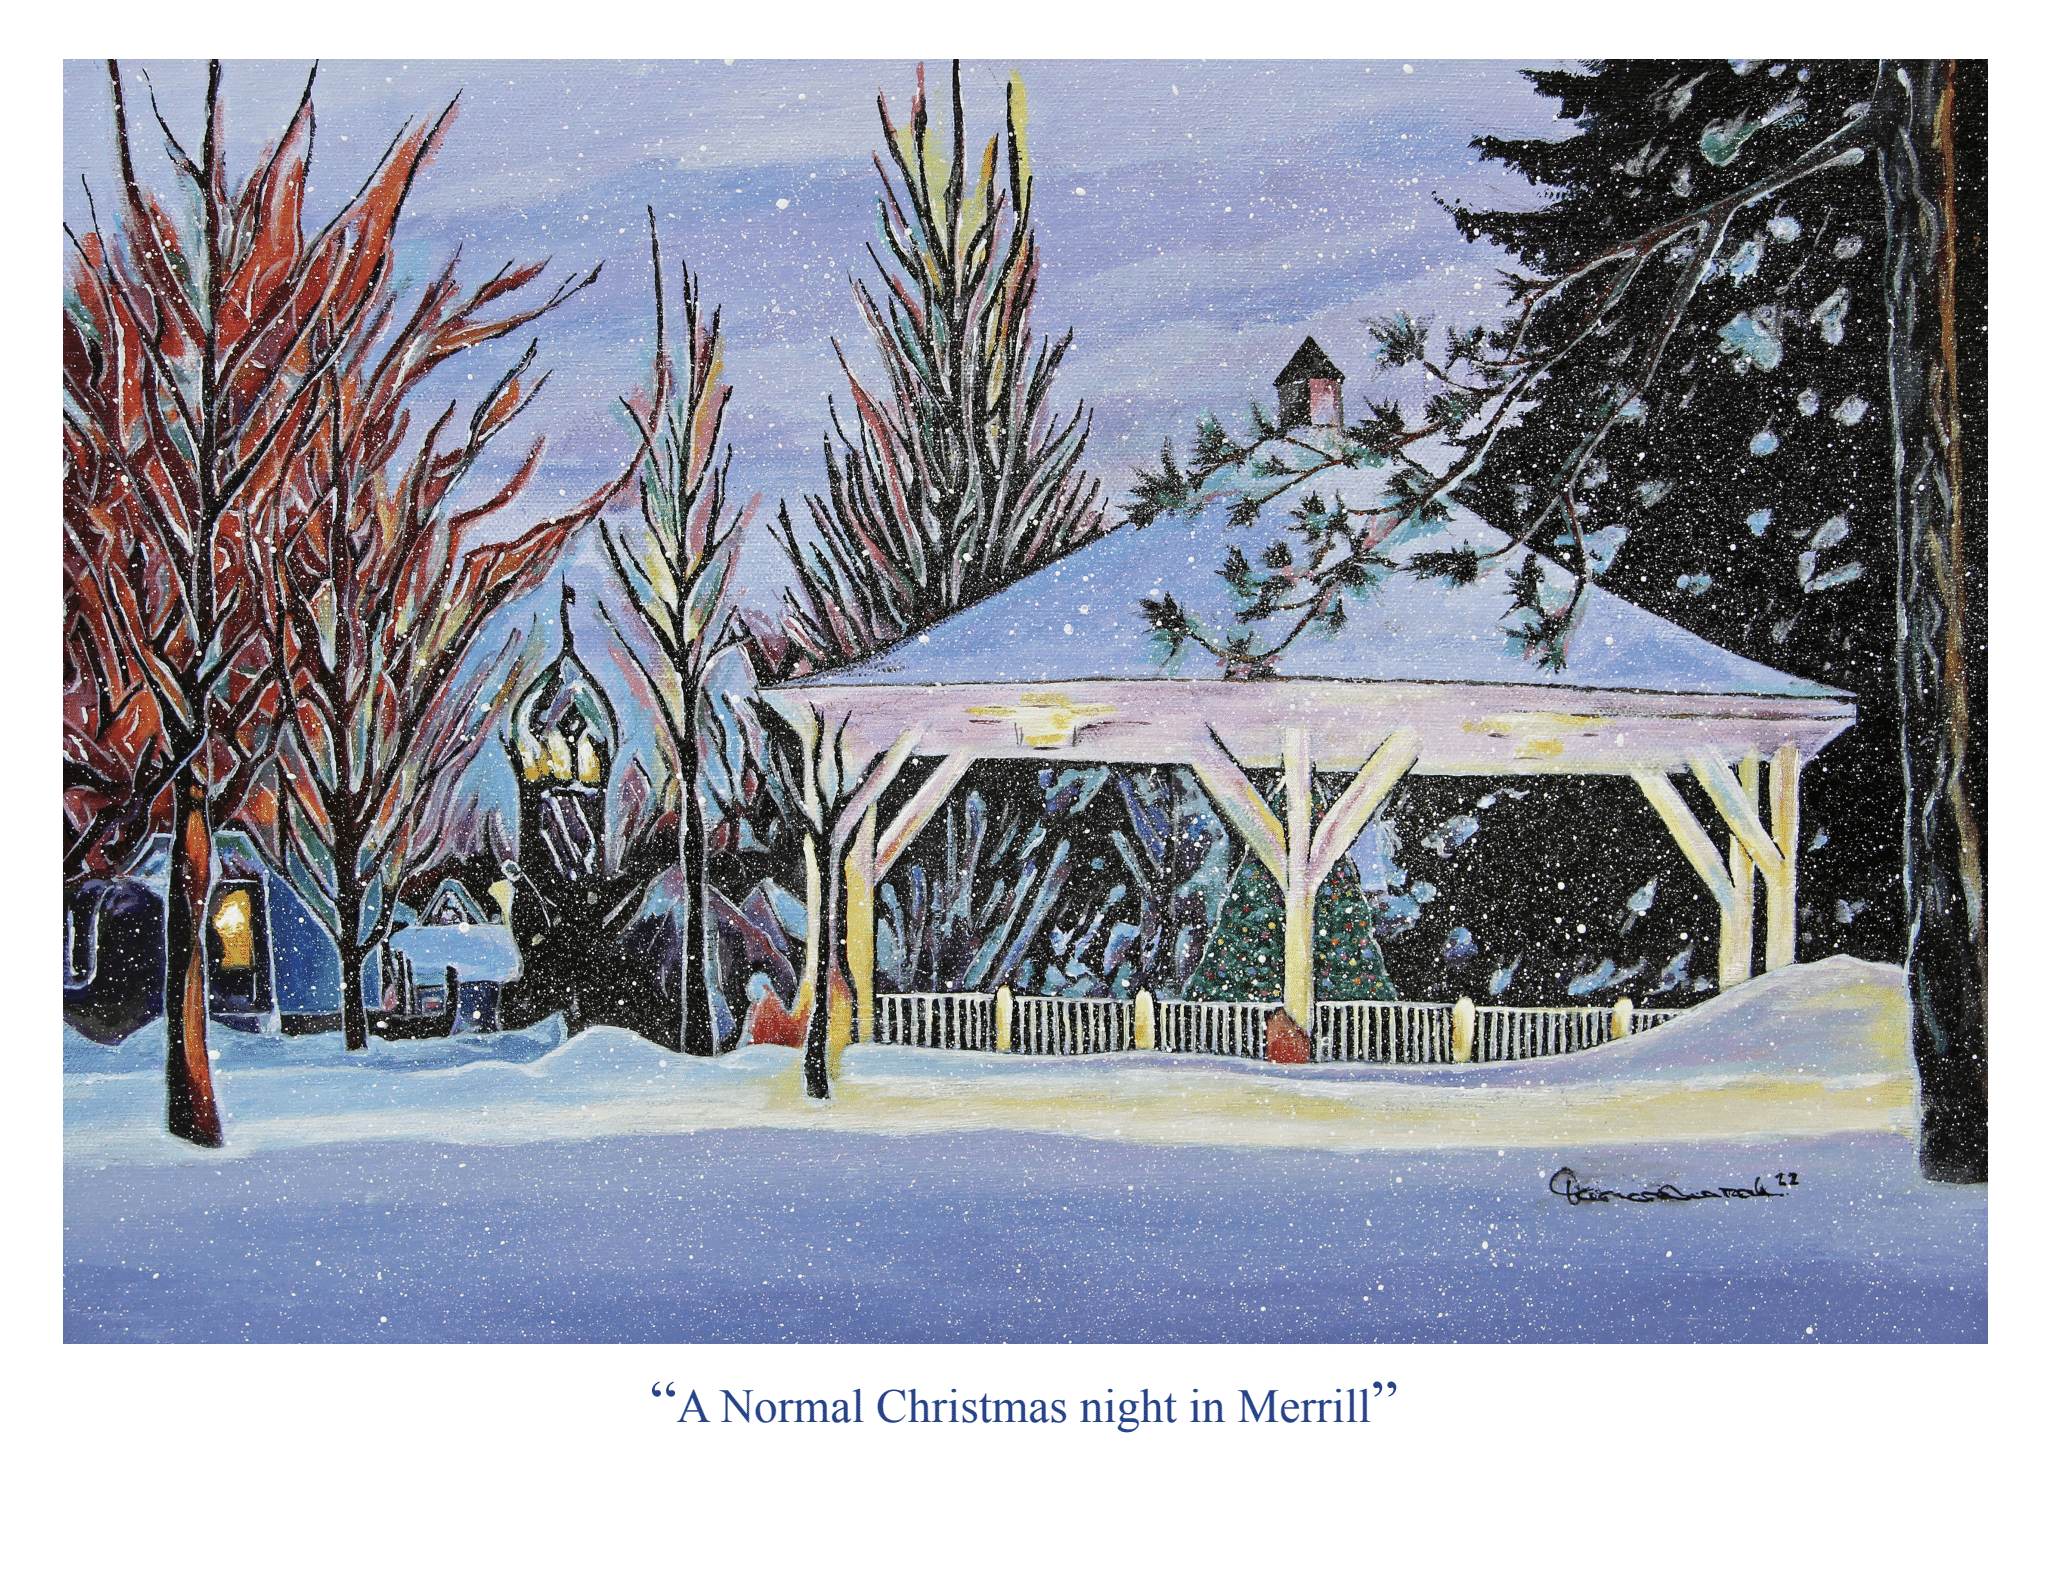 Marczak’s artwork is featured on annual Merrill Chamber Christmas card